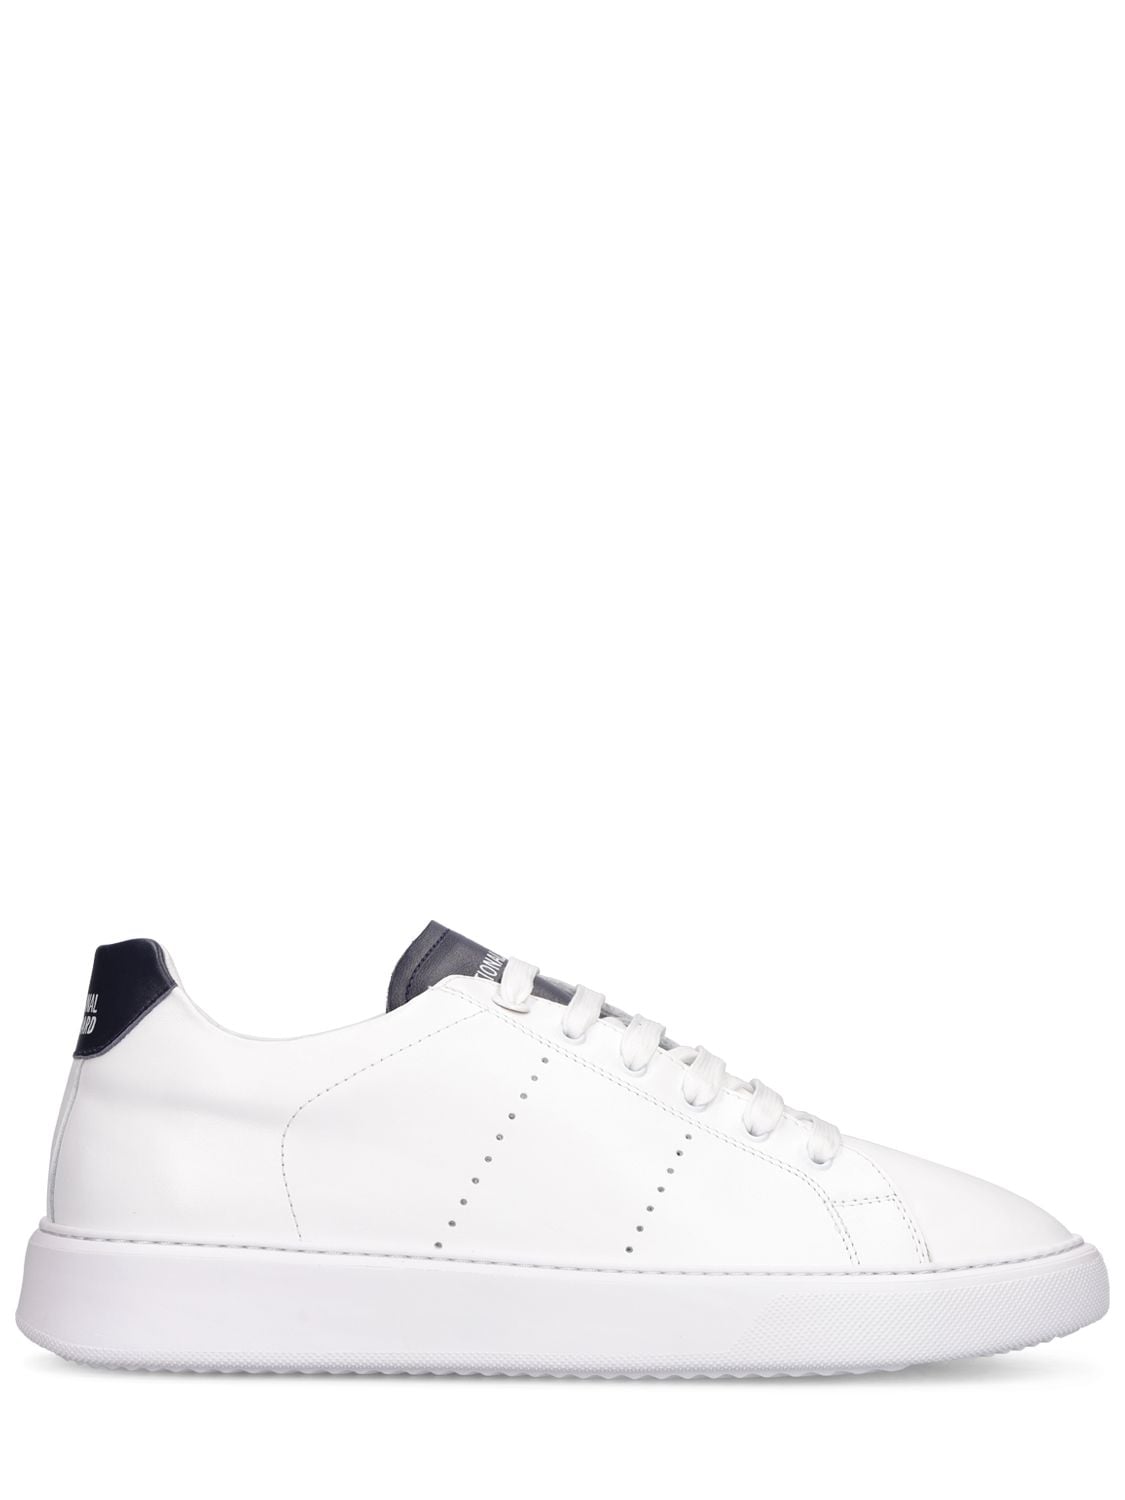 NATIONAL STANDARD EDITION 9 LEATHER LOW SNEAKERS